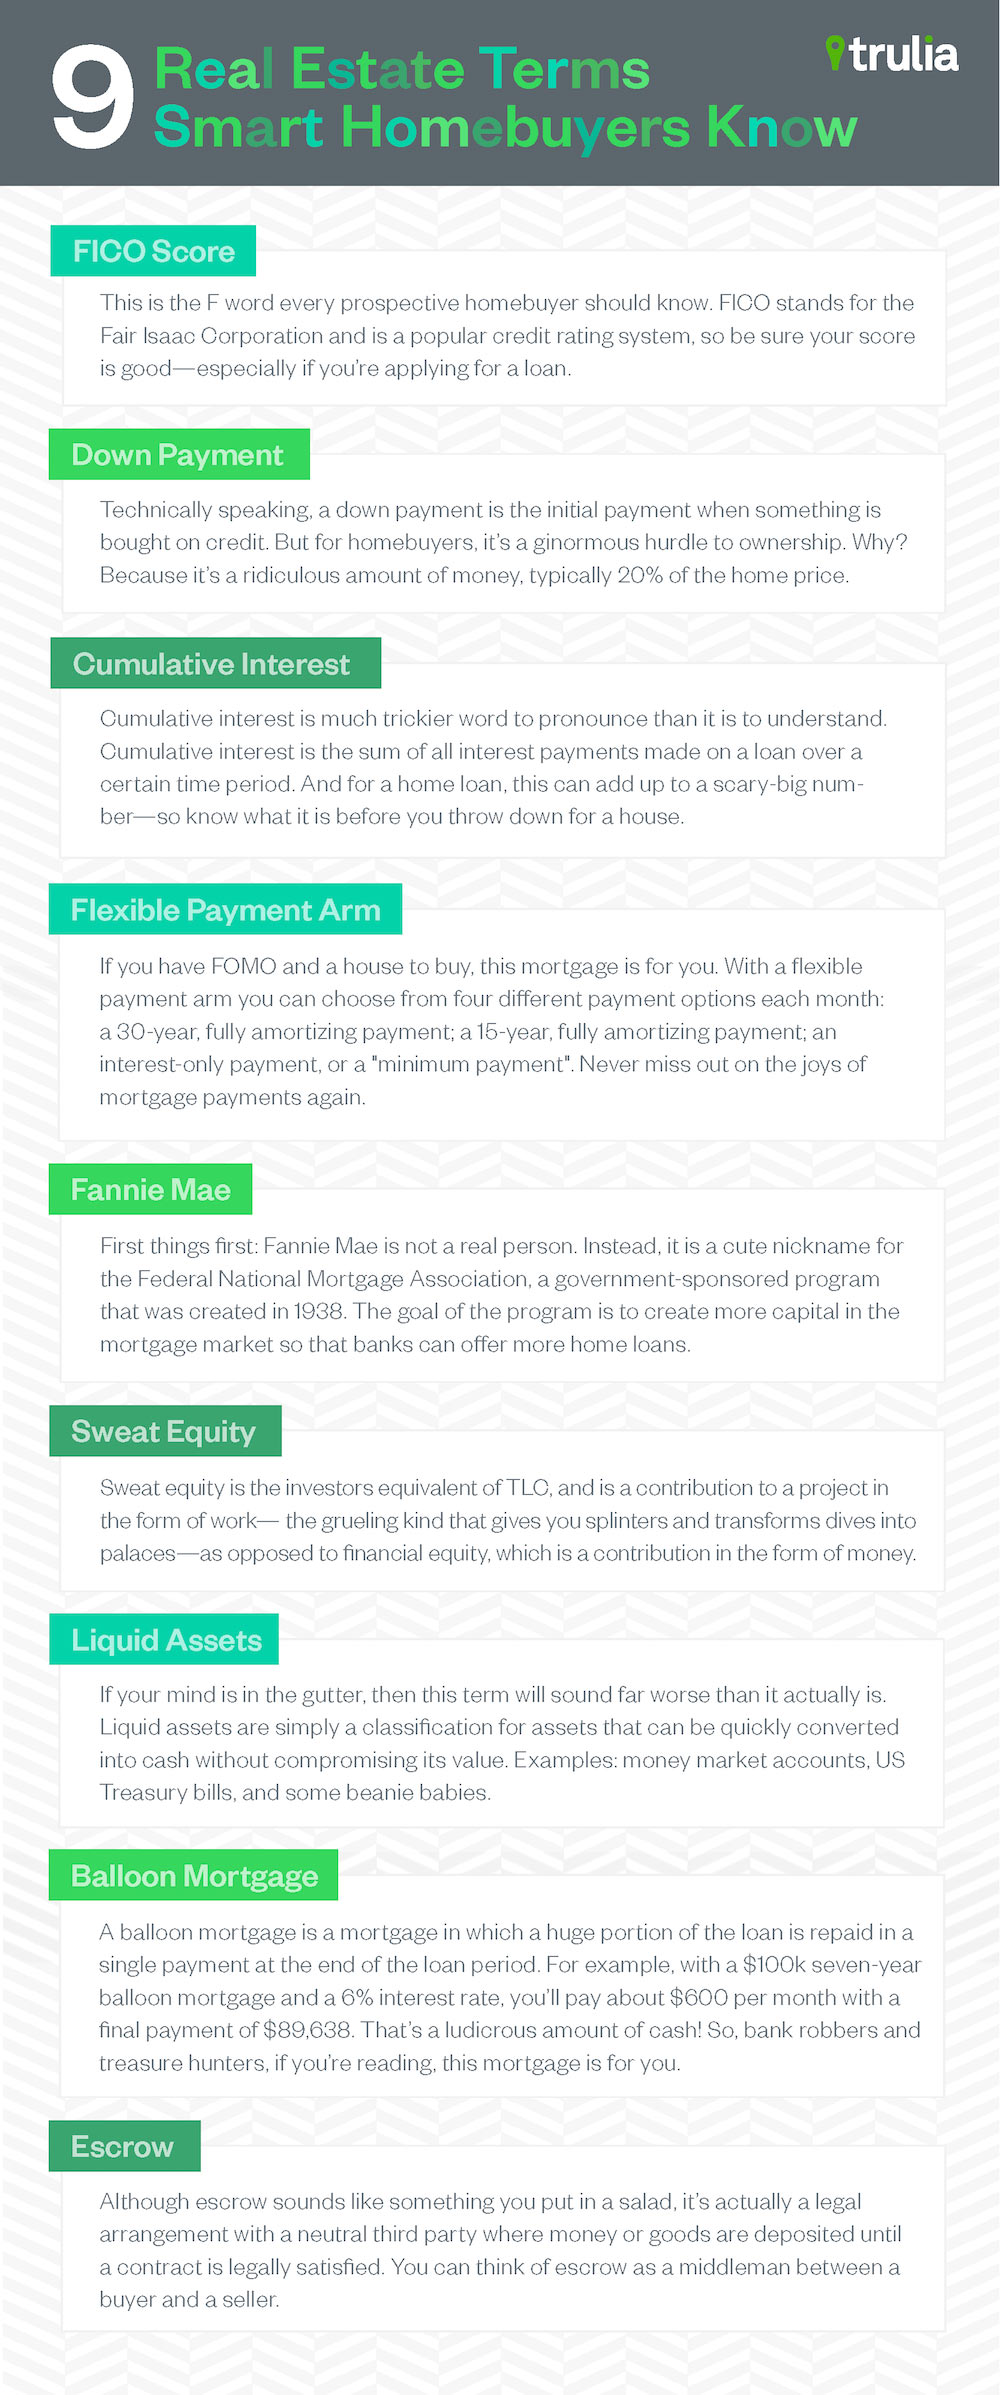 Mar2015-Trulia-9-Real-Estate-Terms-Infographic